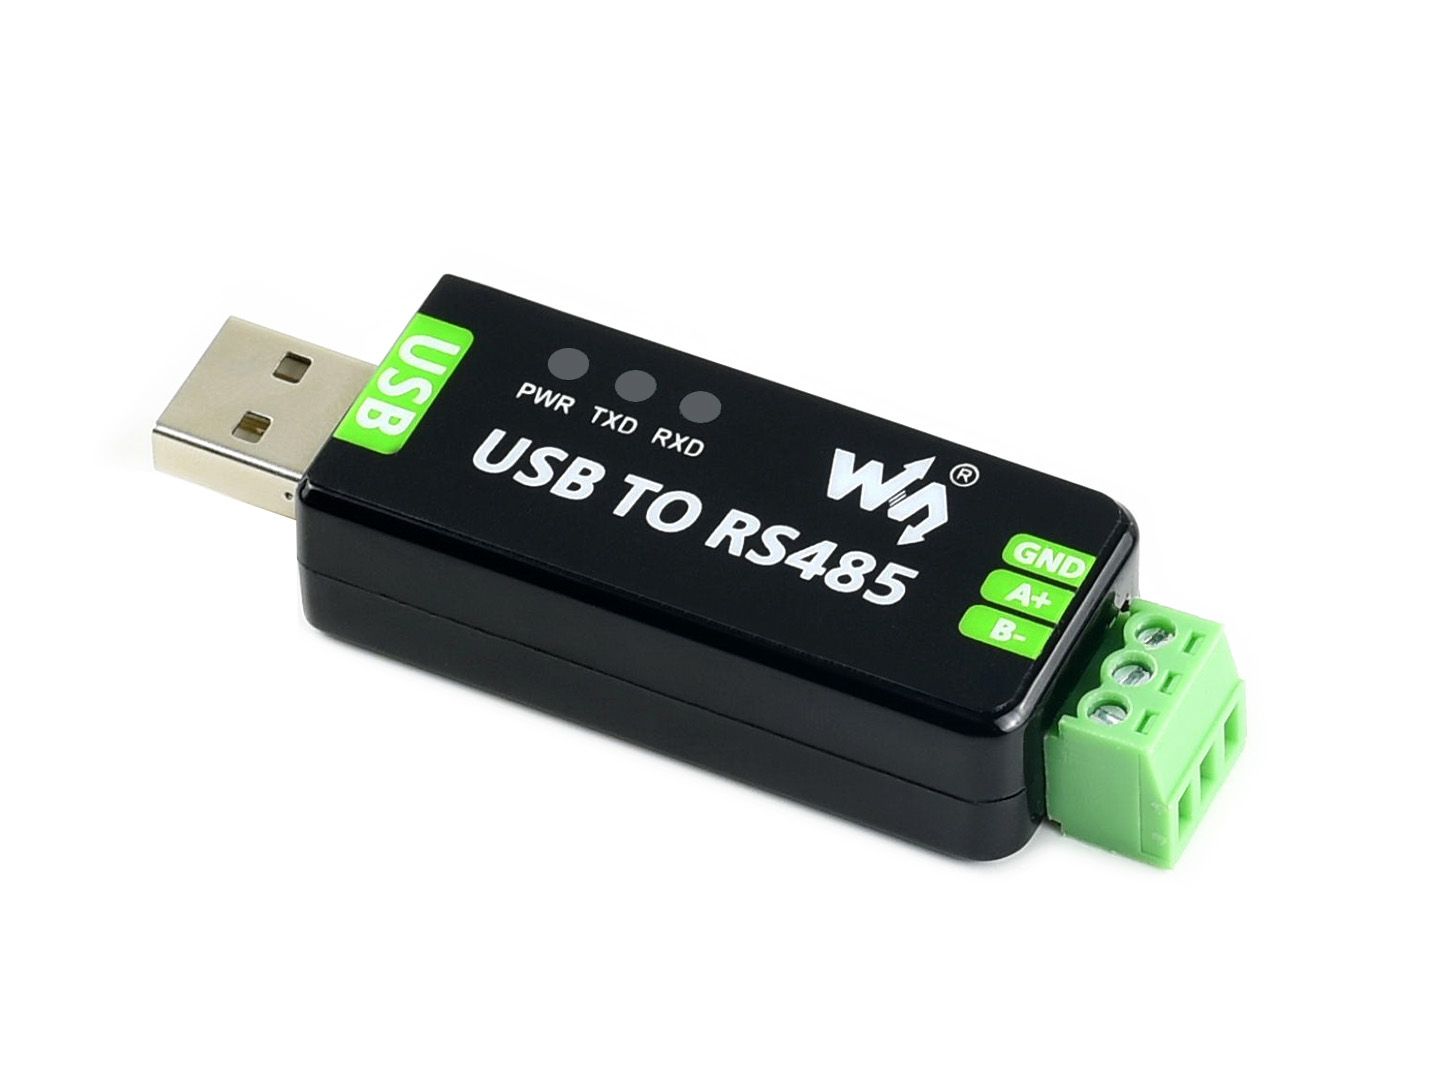 rs485 to usb